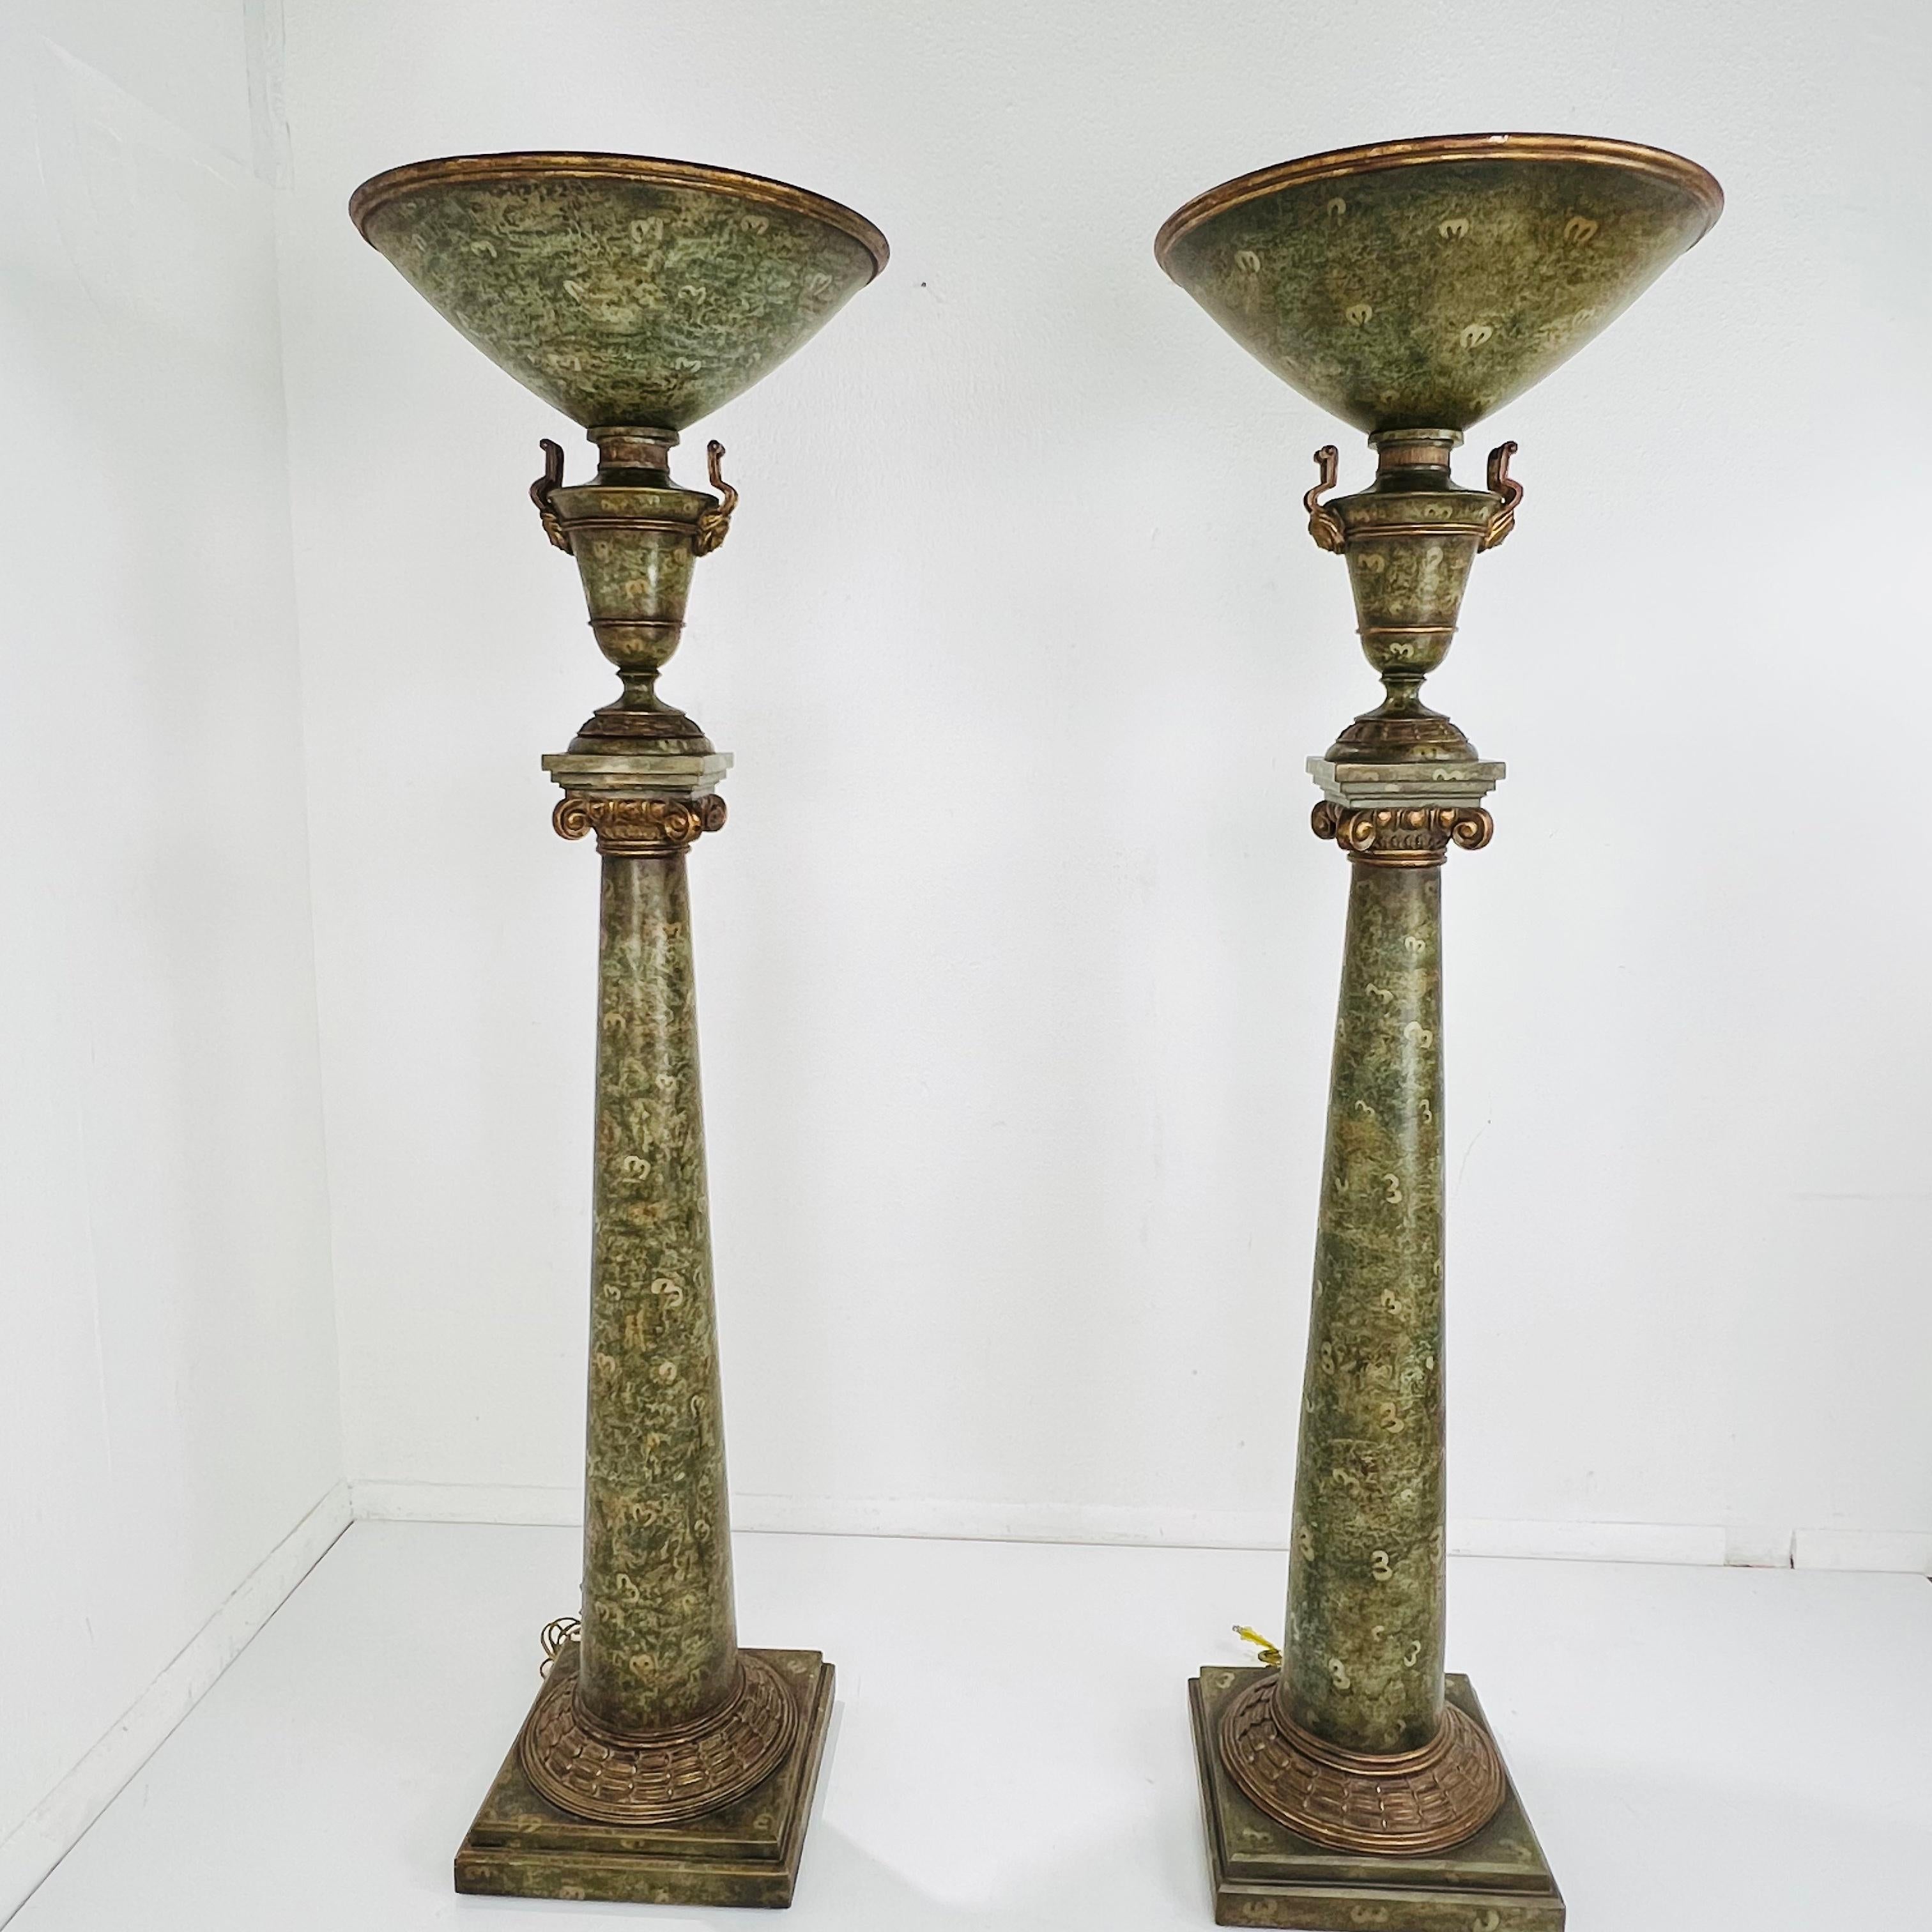 Hand-Painted Pair of Monumental Venetian Torchiere Floor Lamps For Sale